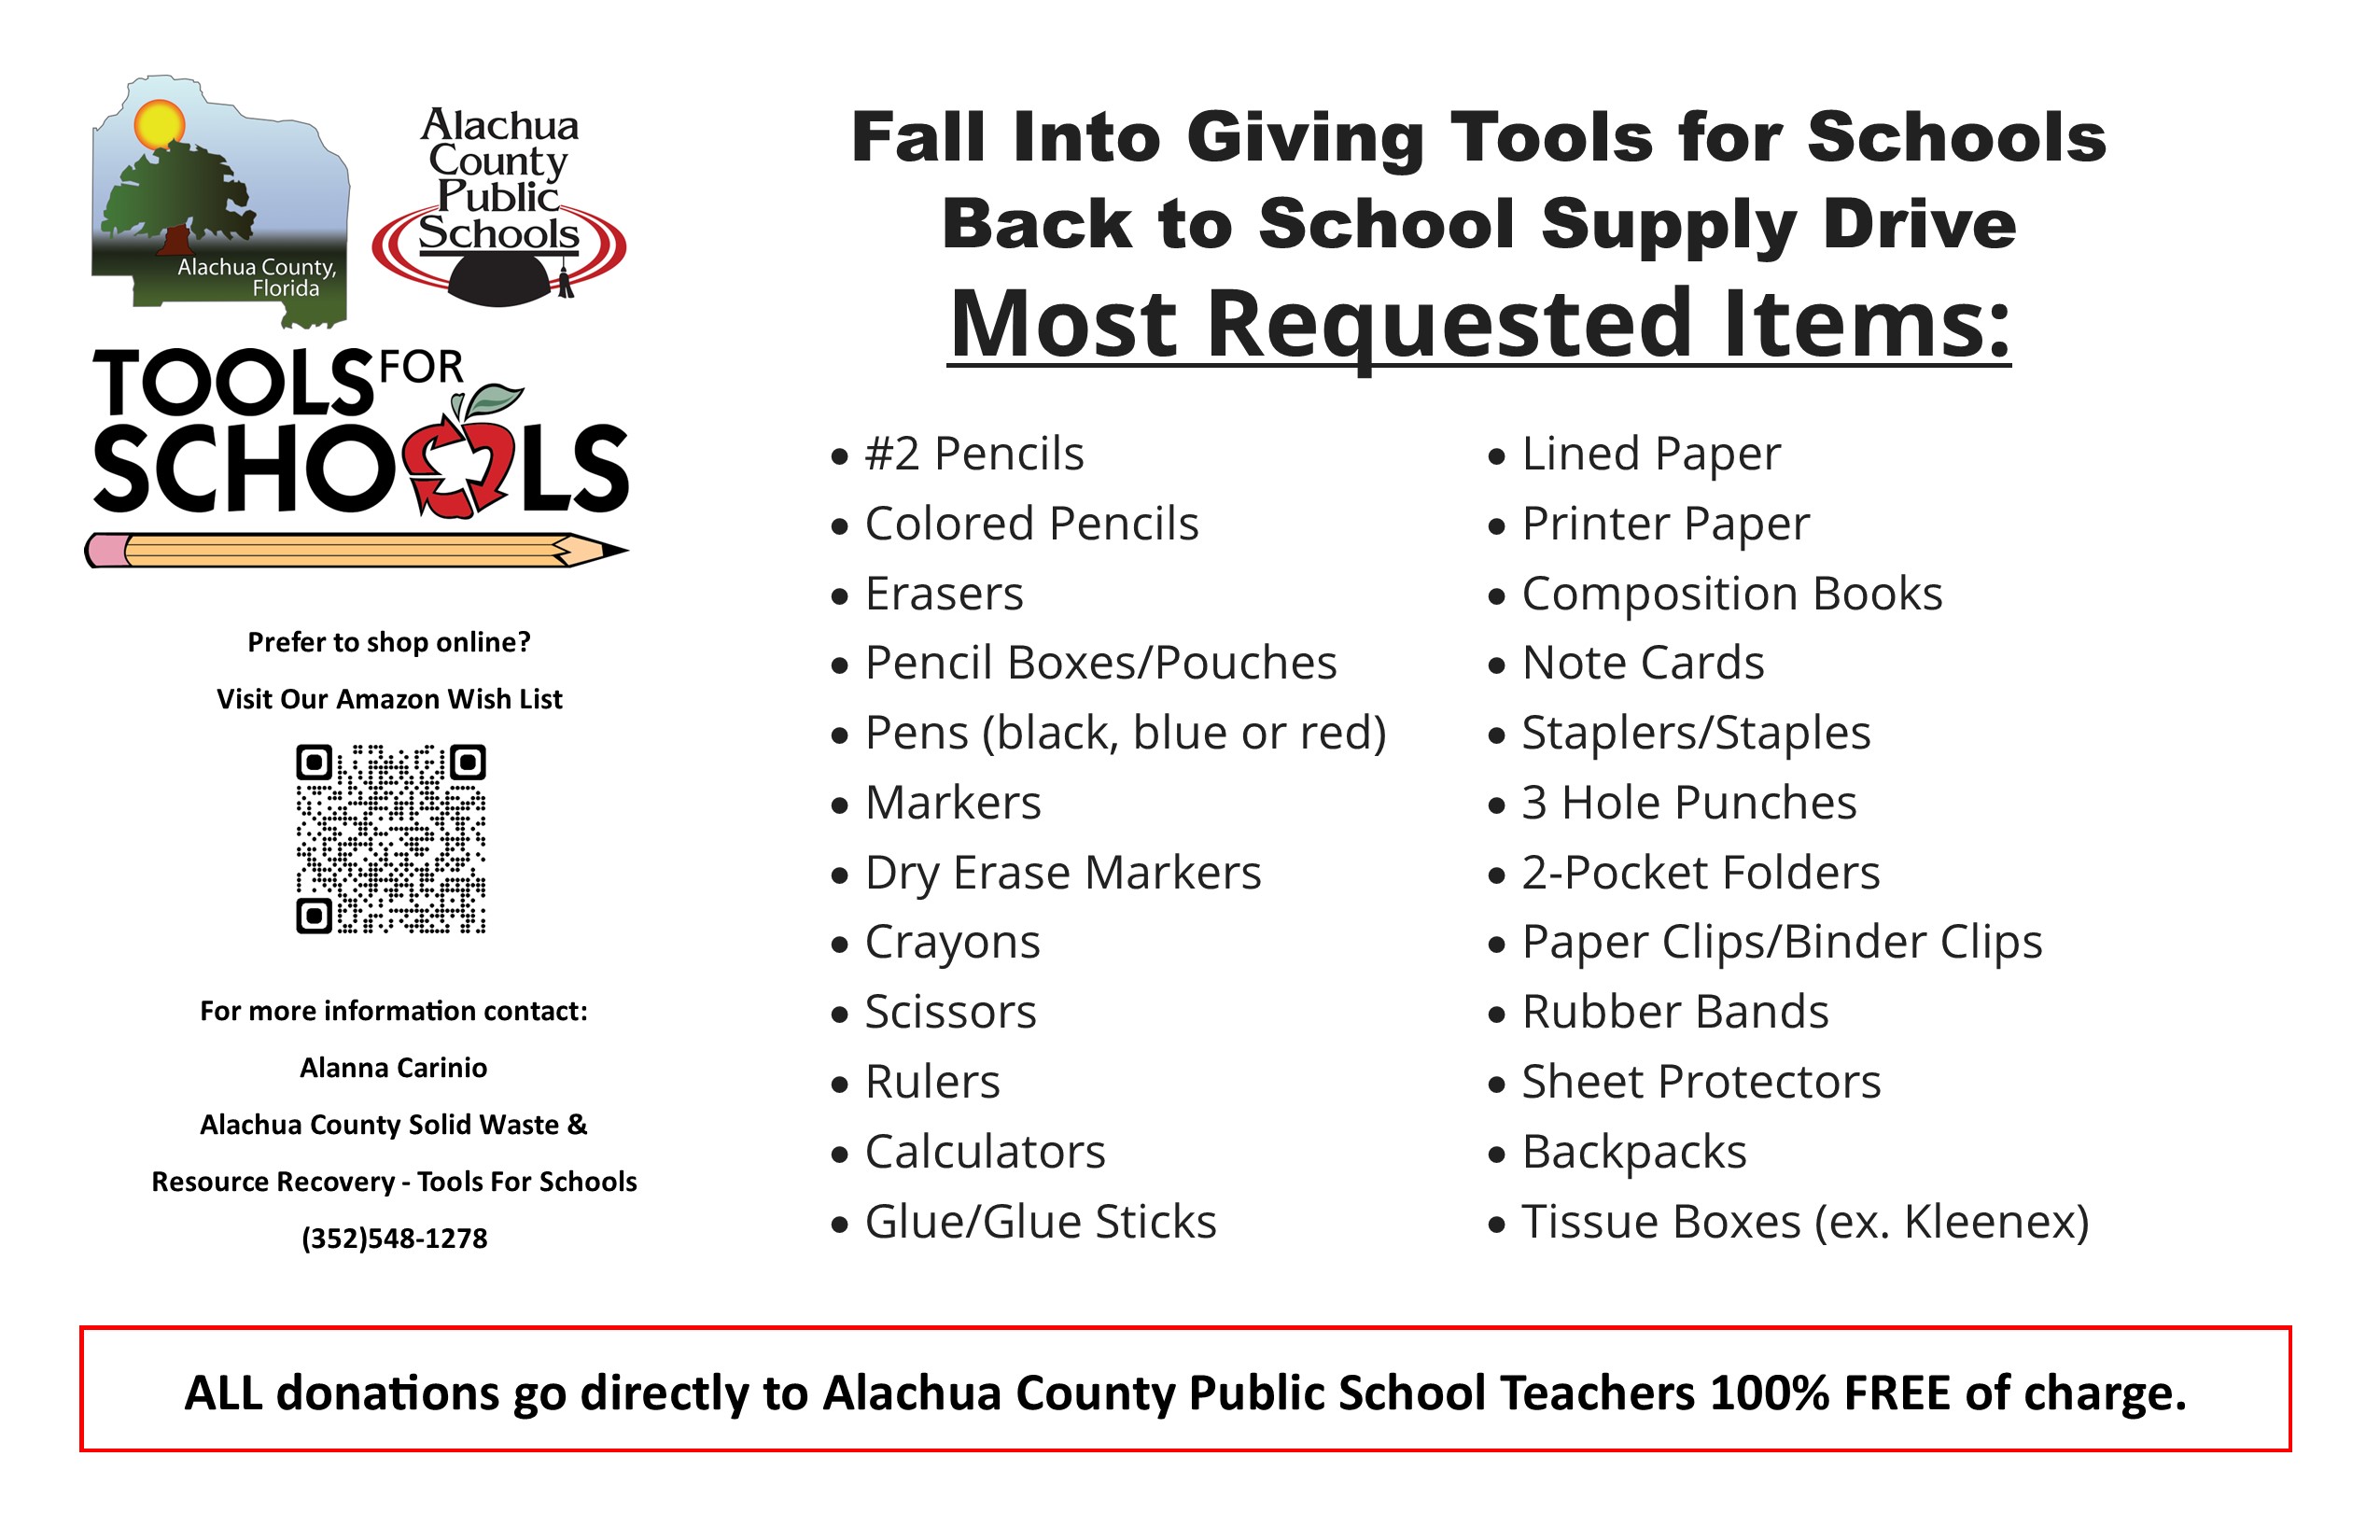 Fall Into Giving Tools for Schools Back to School Supply Drive